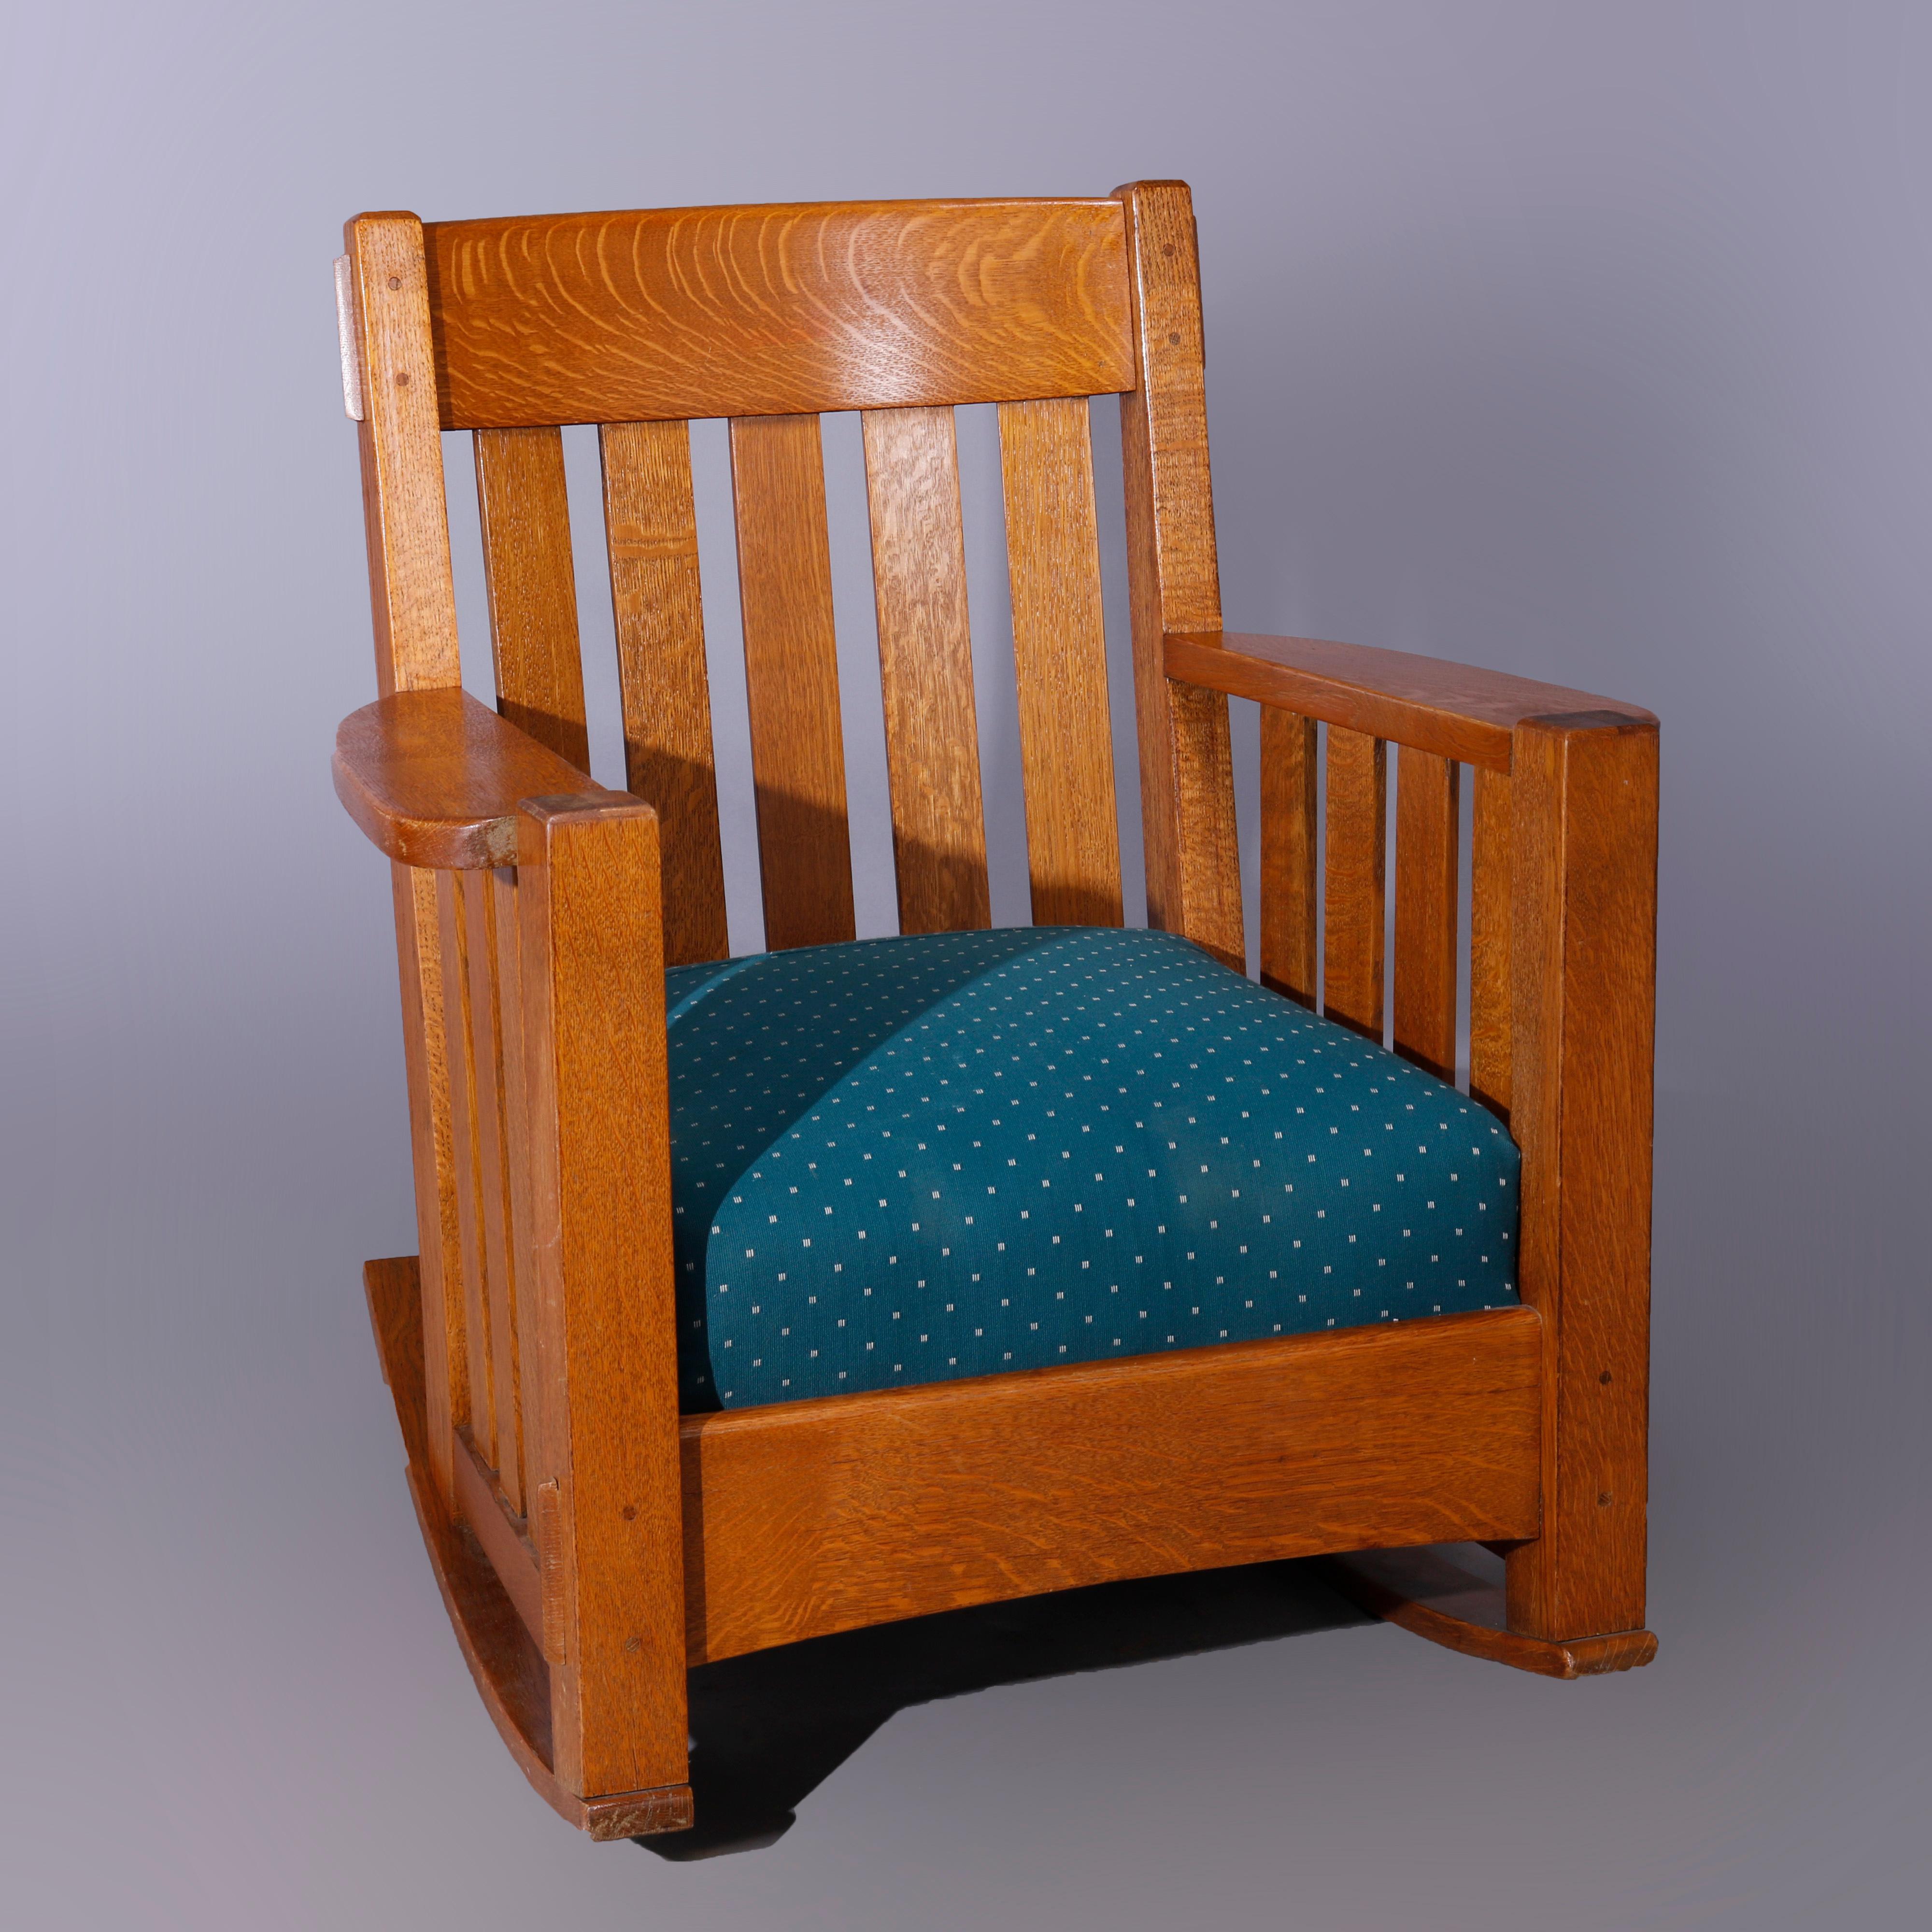 An antique Arts & Crafts Harden mission oak rocker offers slat back and sides with cushion seat, c1910

Measures - 34'' H x 30.5'' W x 29'' D; 17